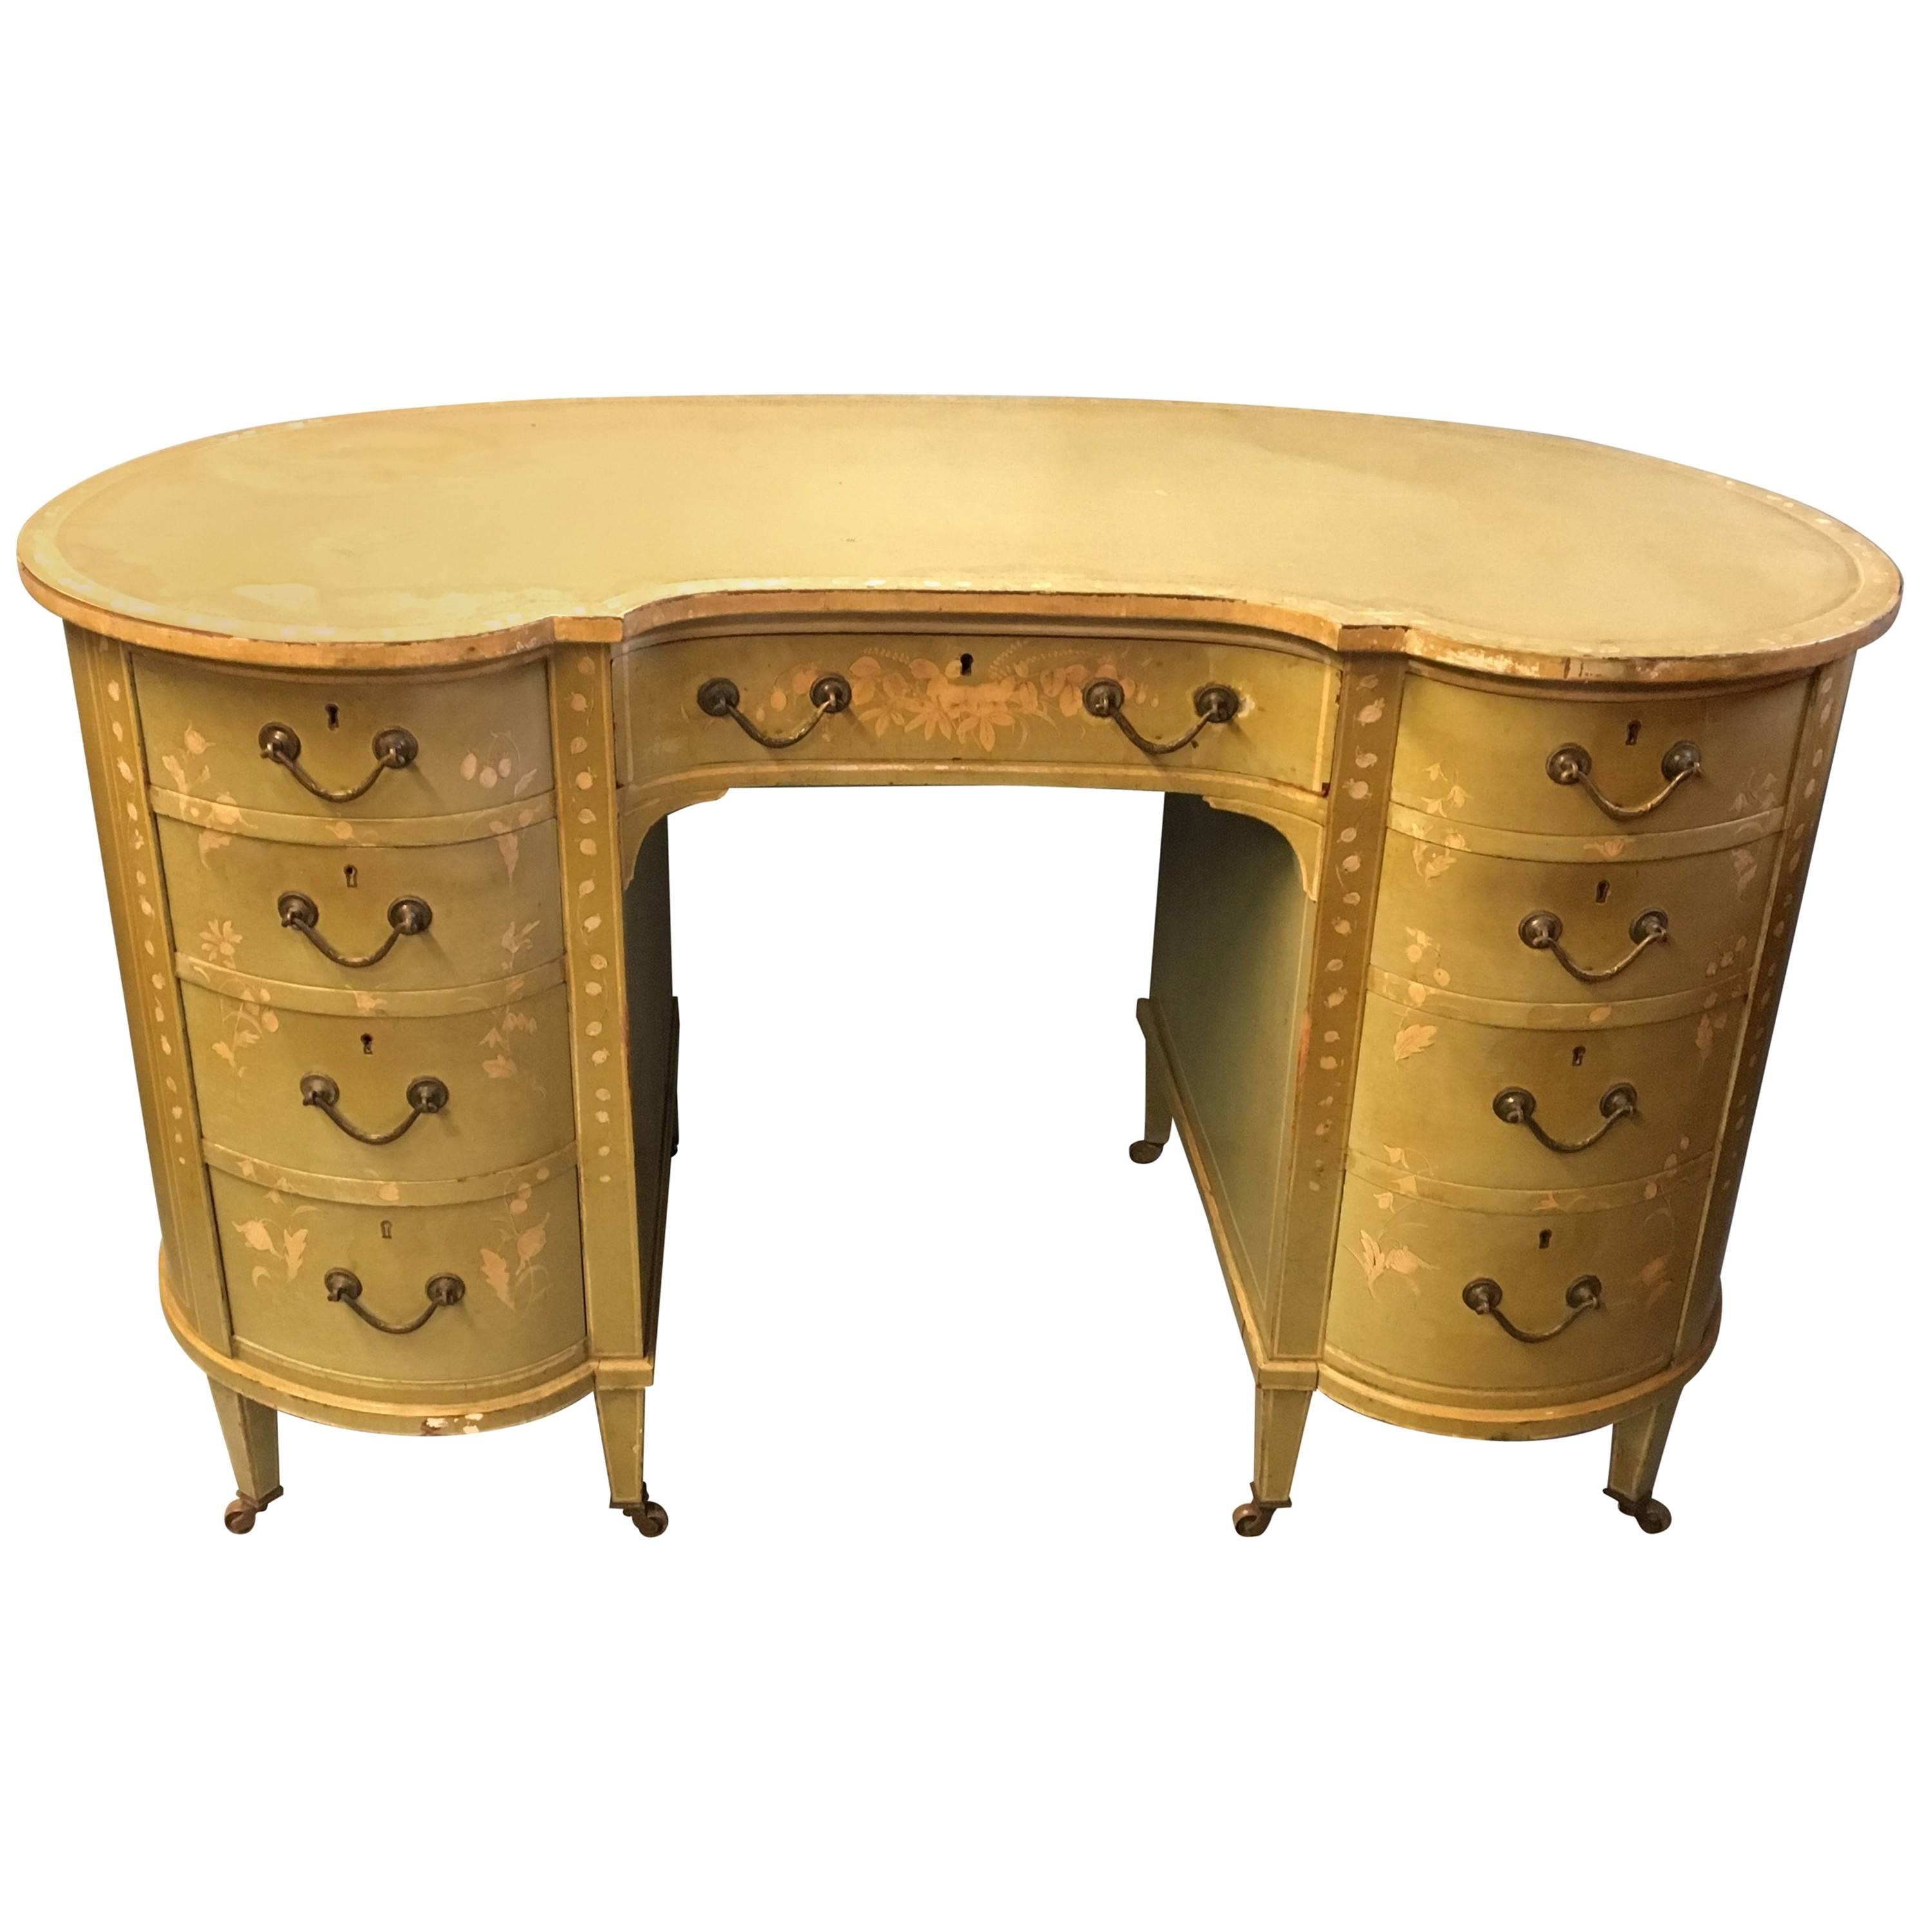 Early 20th Century Decorated Kidney Shaped Writing Desk